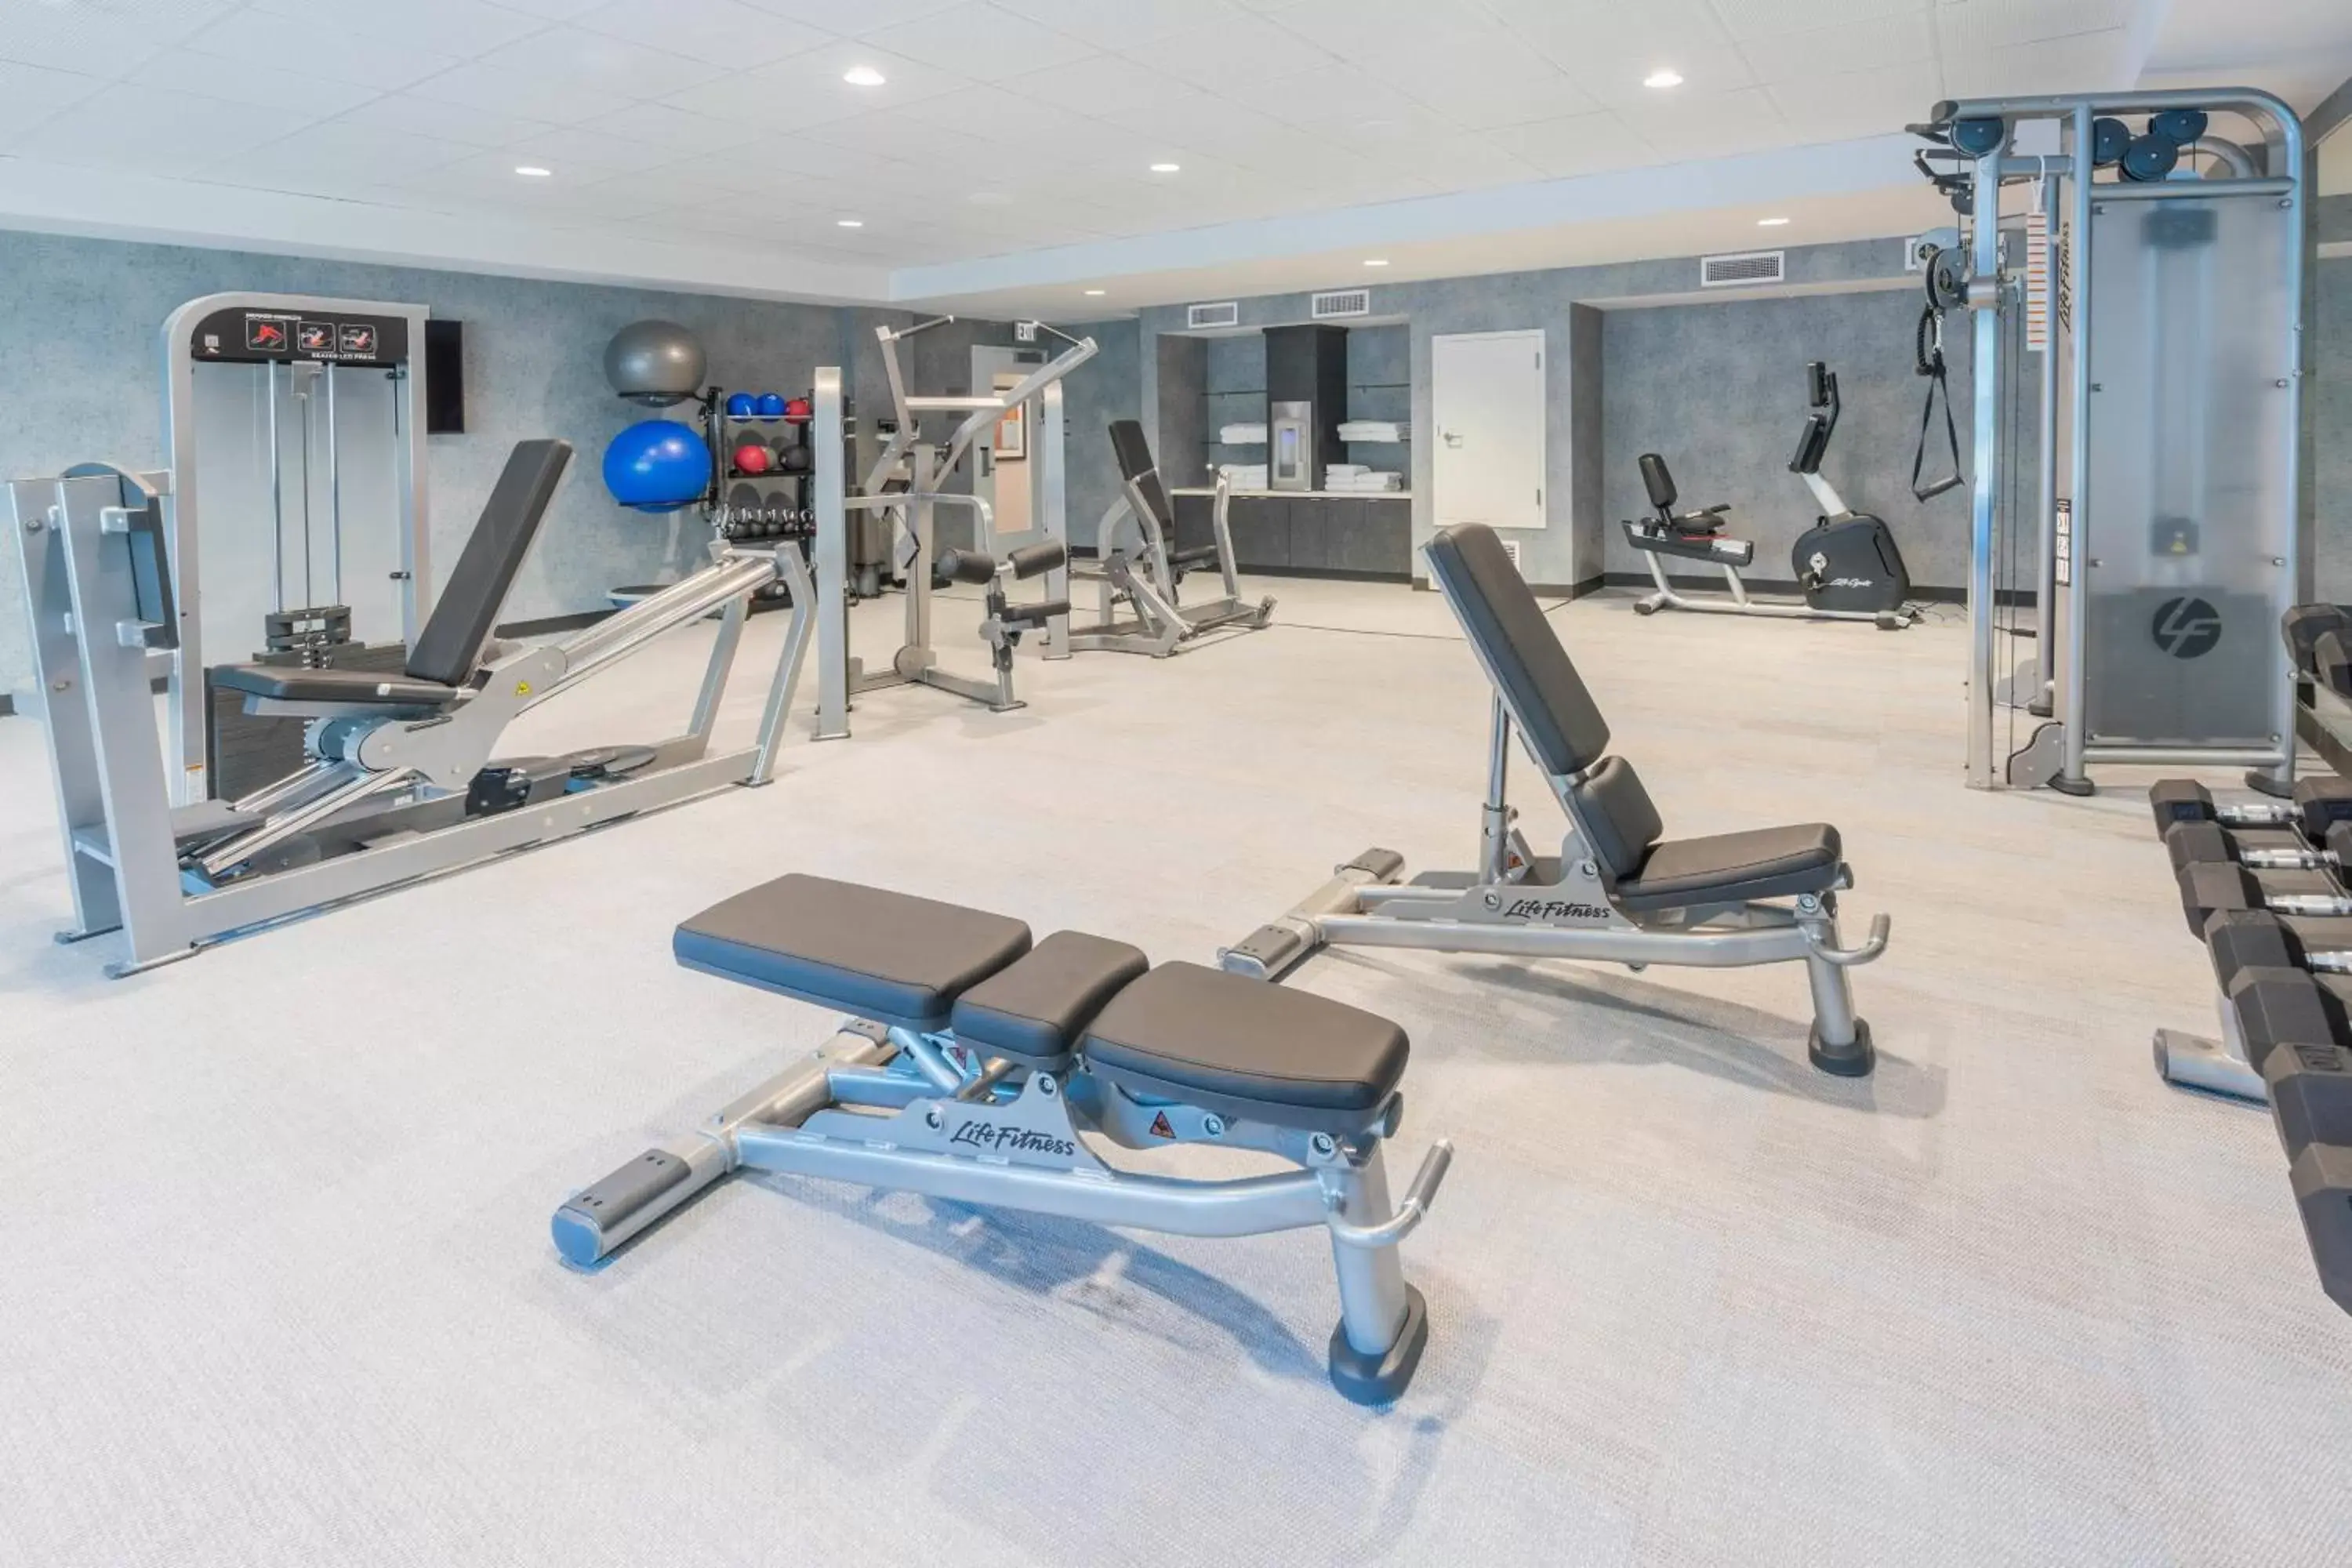 Fitness centre/facilities, Fitness Center/Facilities in Courtyard by Marriott Thousand Oaks Agoura Hills